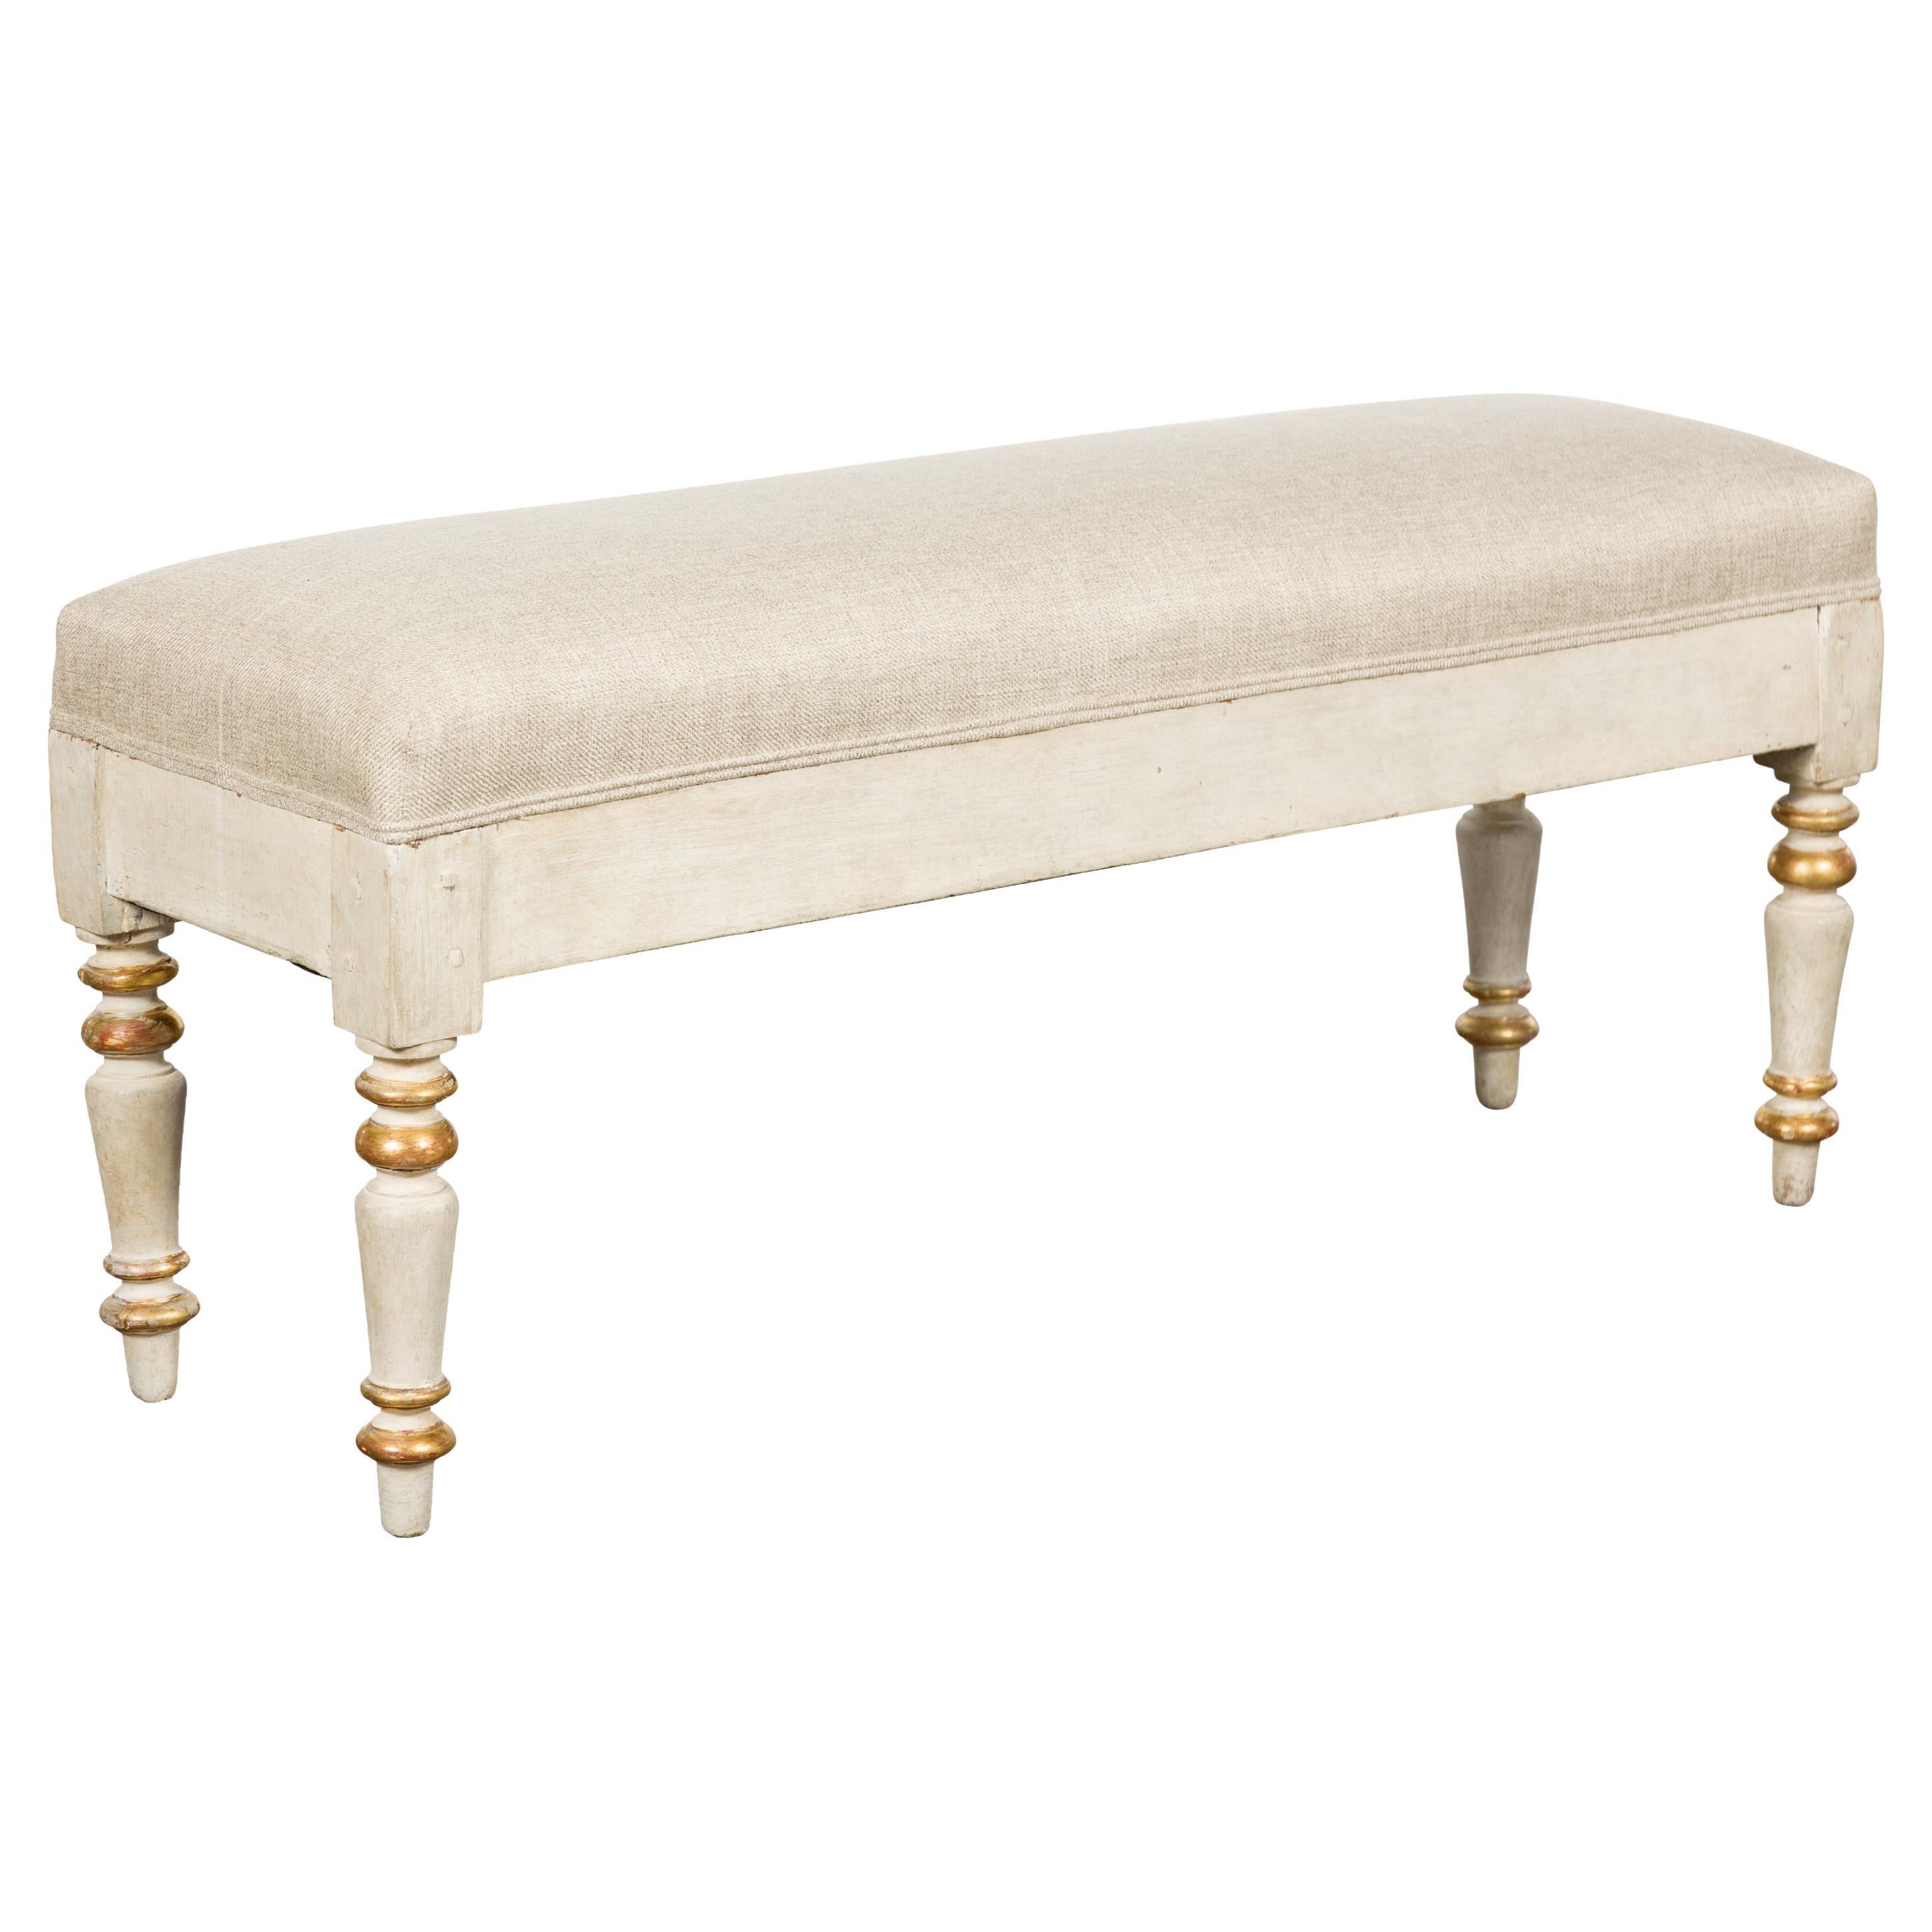 19th Century French Painted and Gilded Bench with Turned Legs and Upholstery For Sale